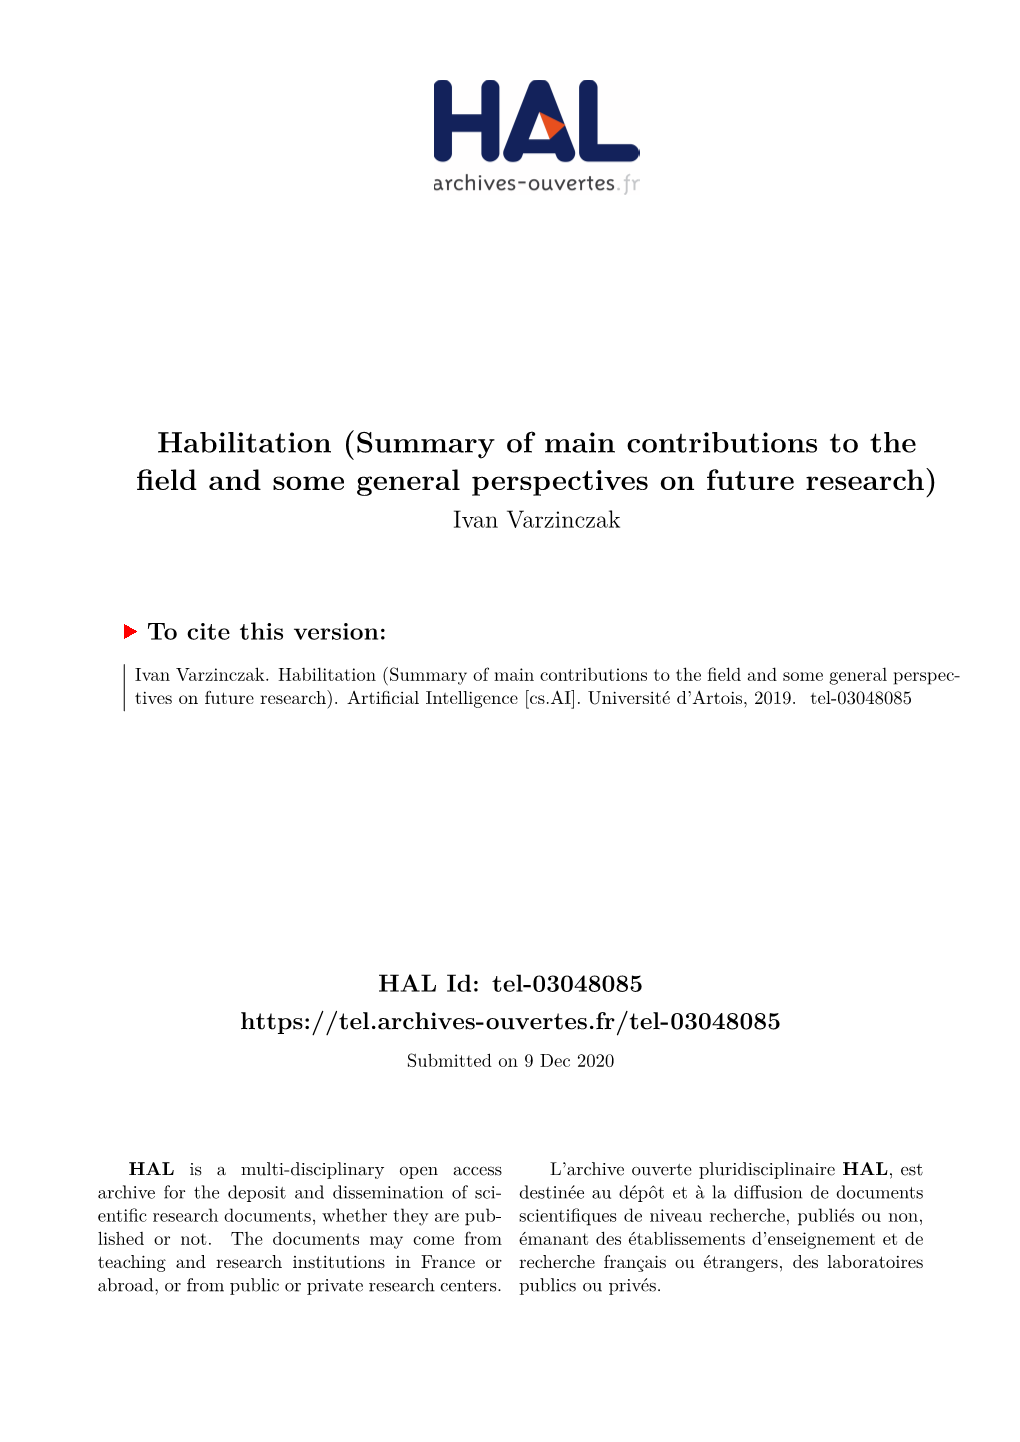 Habilitation (Summary of Main Contributions to the Field and Some General Perspectives on Future Research) Ivan Varzinczak